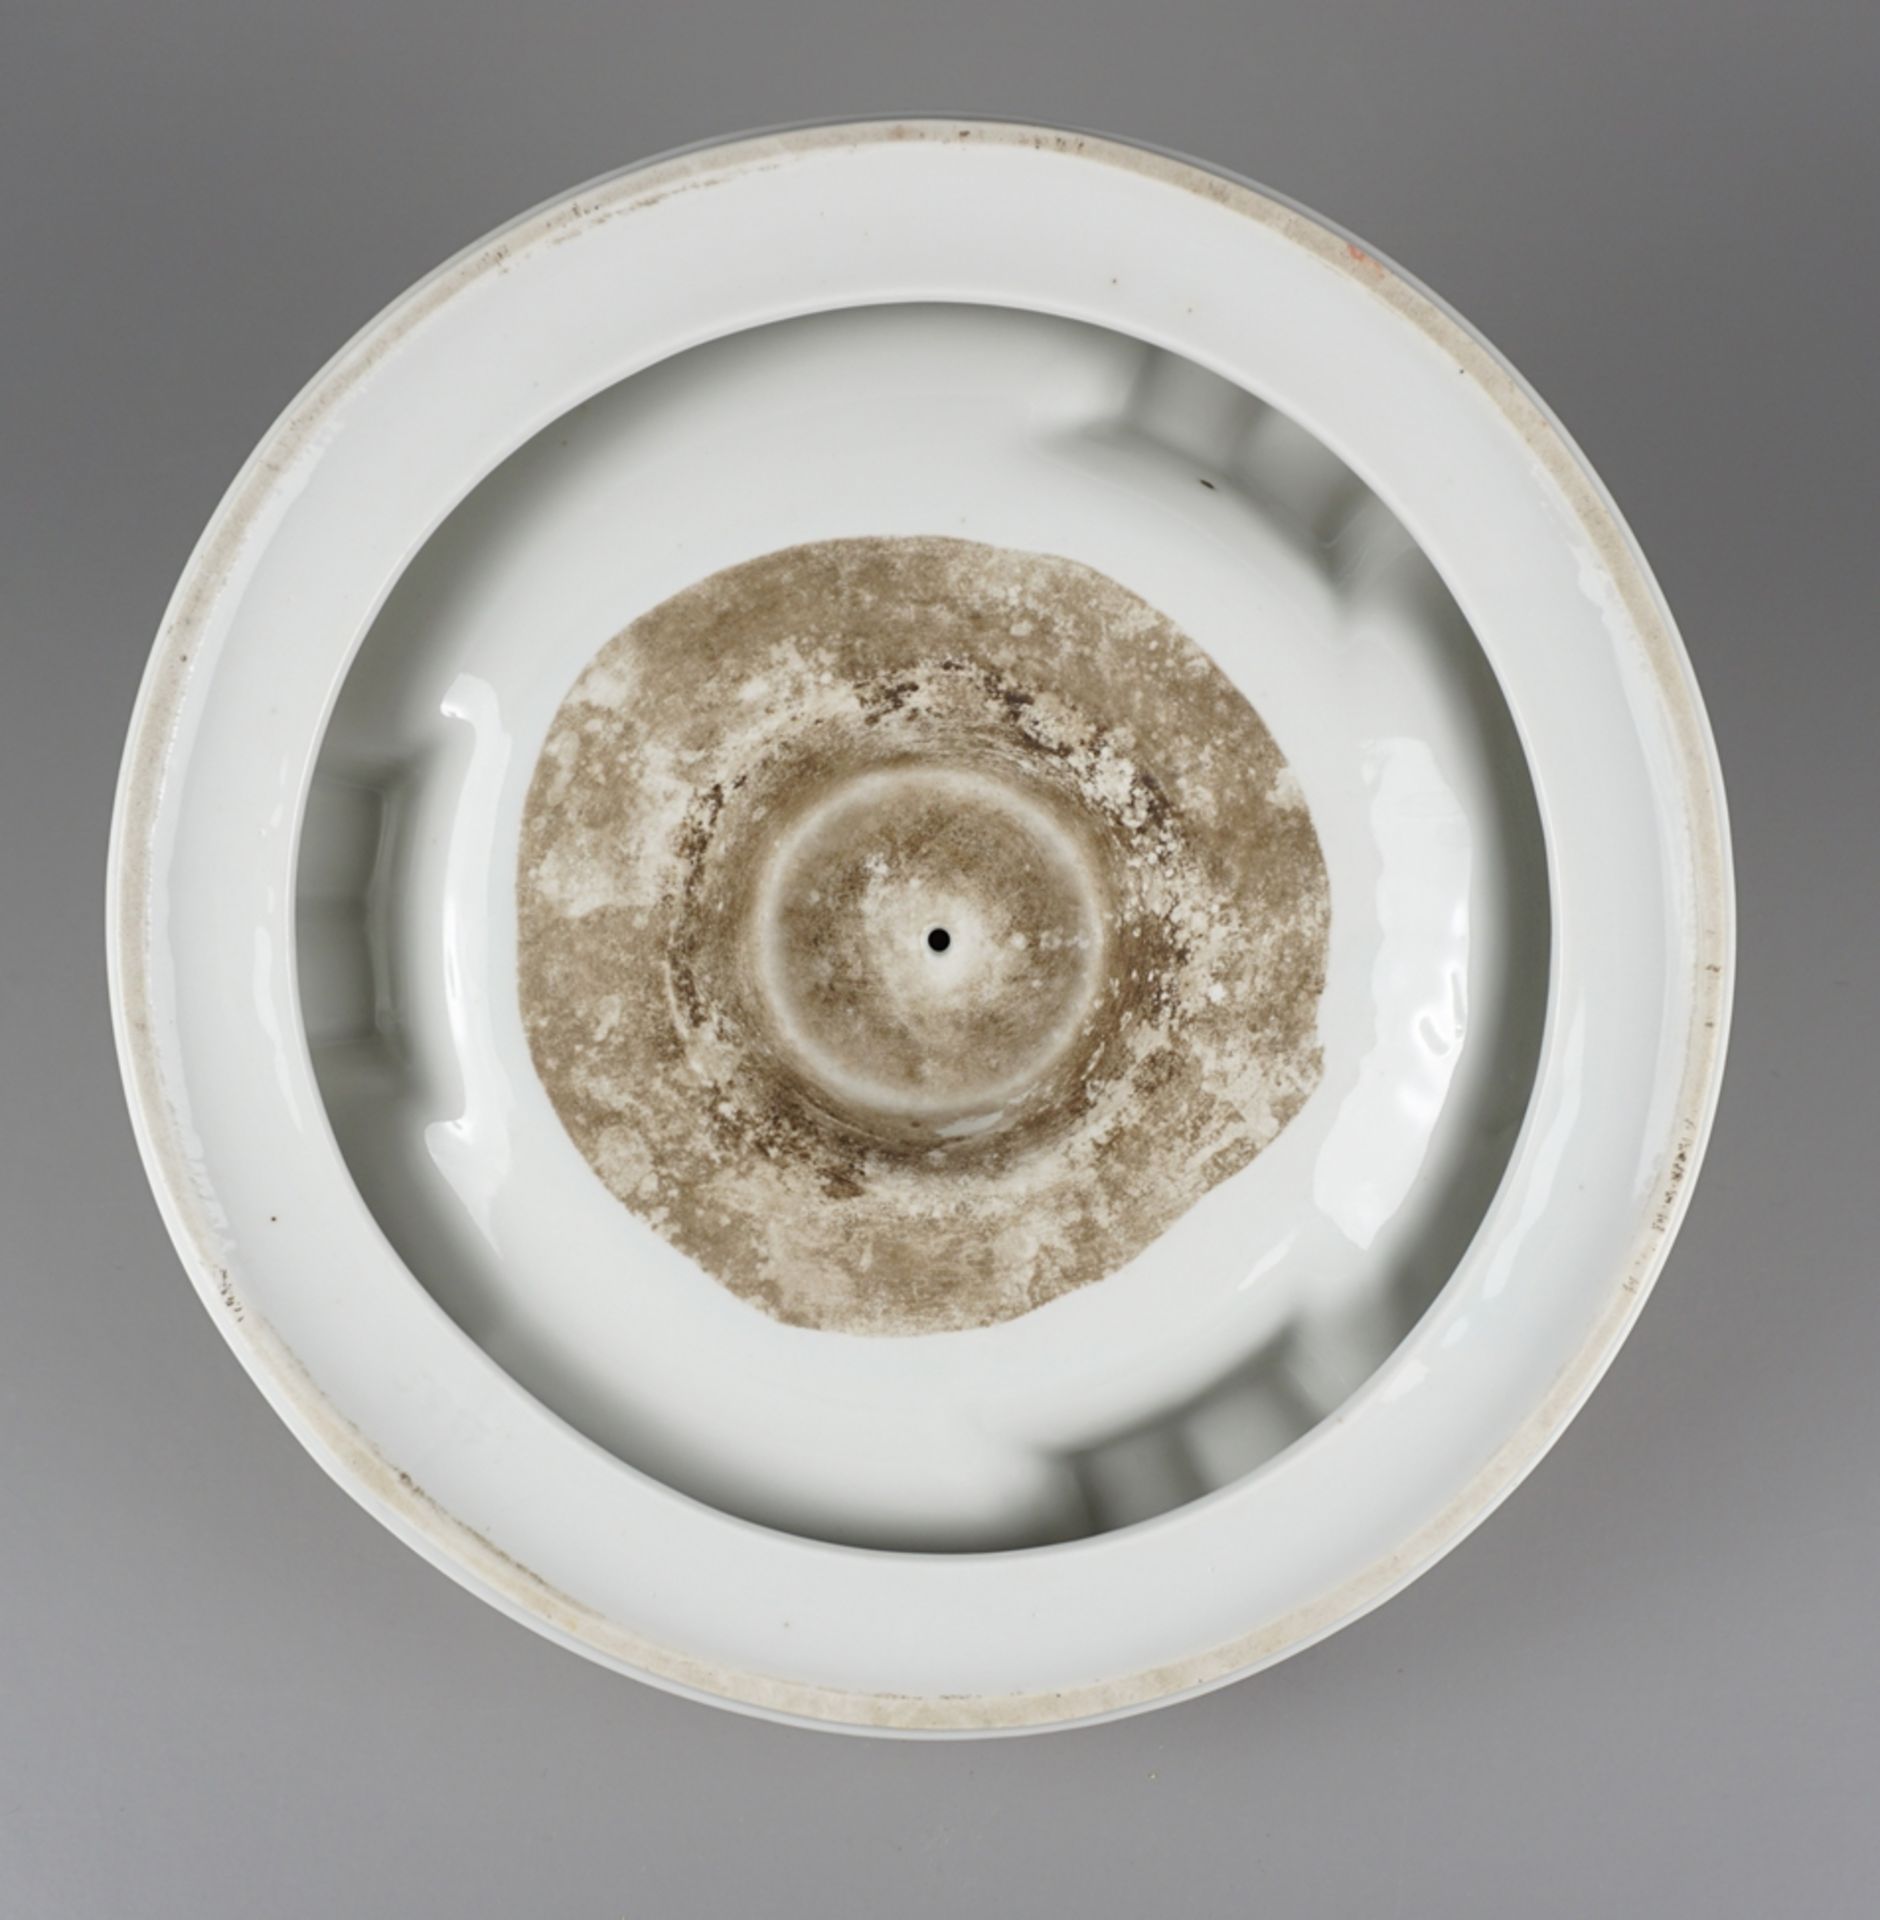 Large regulars` table ashtray "Schultheiß-Brauerei Dessau", GDR, probably 1950s/1960s, d.24cm - Image 4 of 4